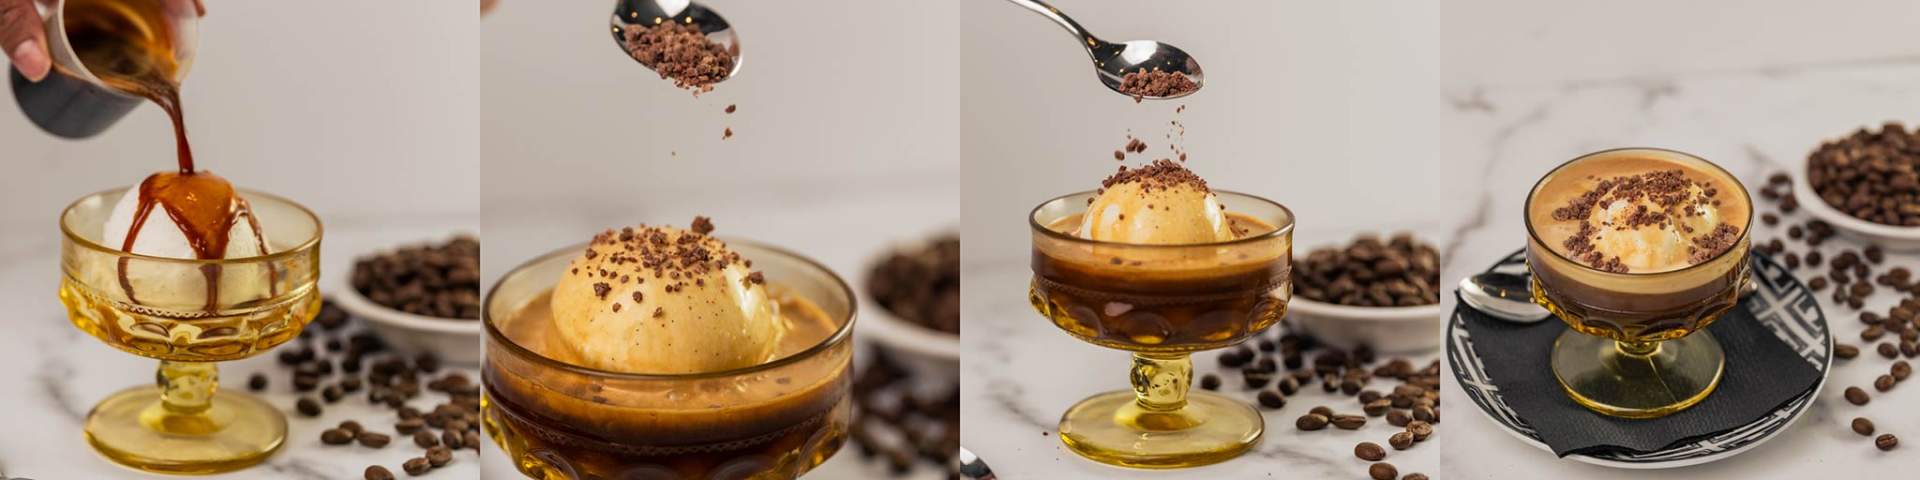 Affogatoes - the richness of our artisanal gelato lavished with our homemade Valhorna chocolate sauce and adorned with delightful white chocolate pearls